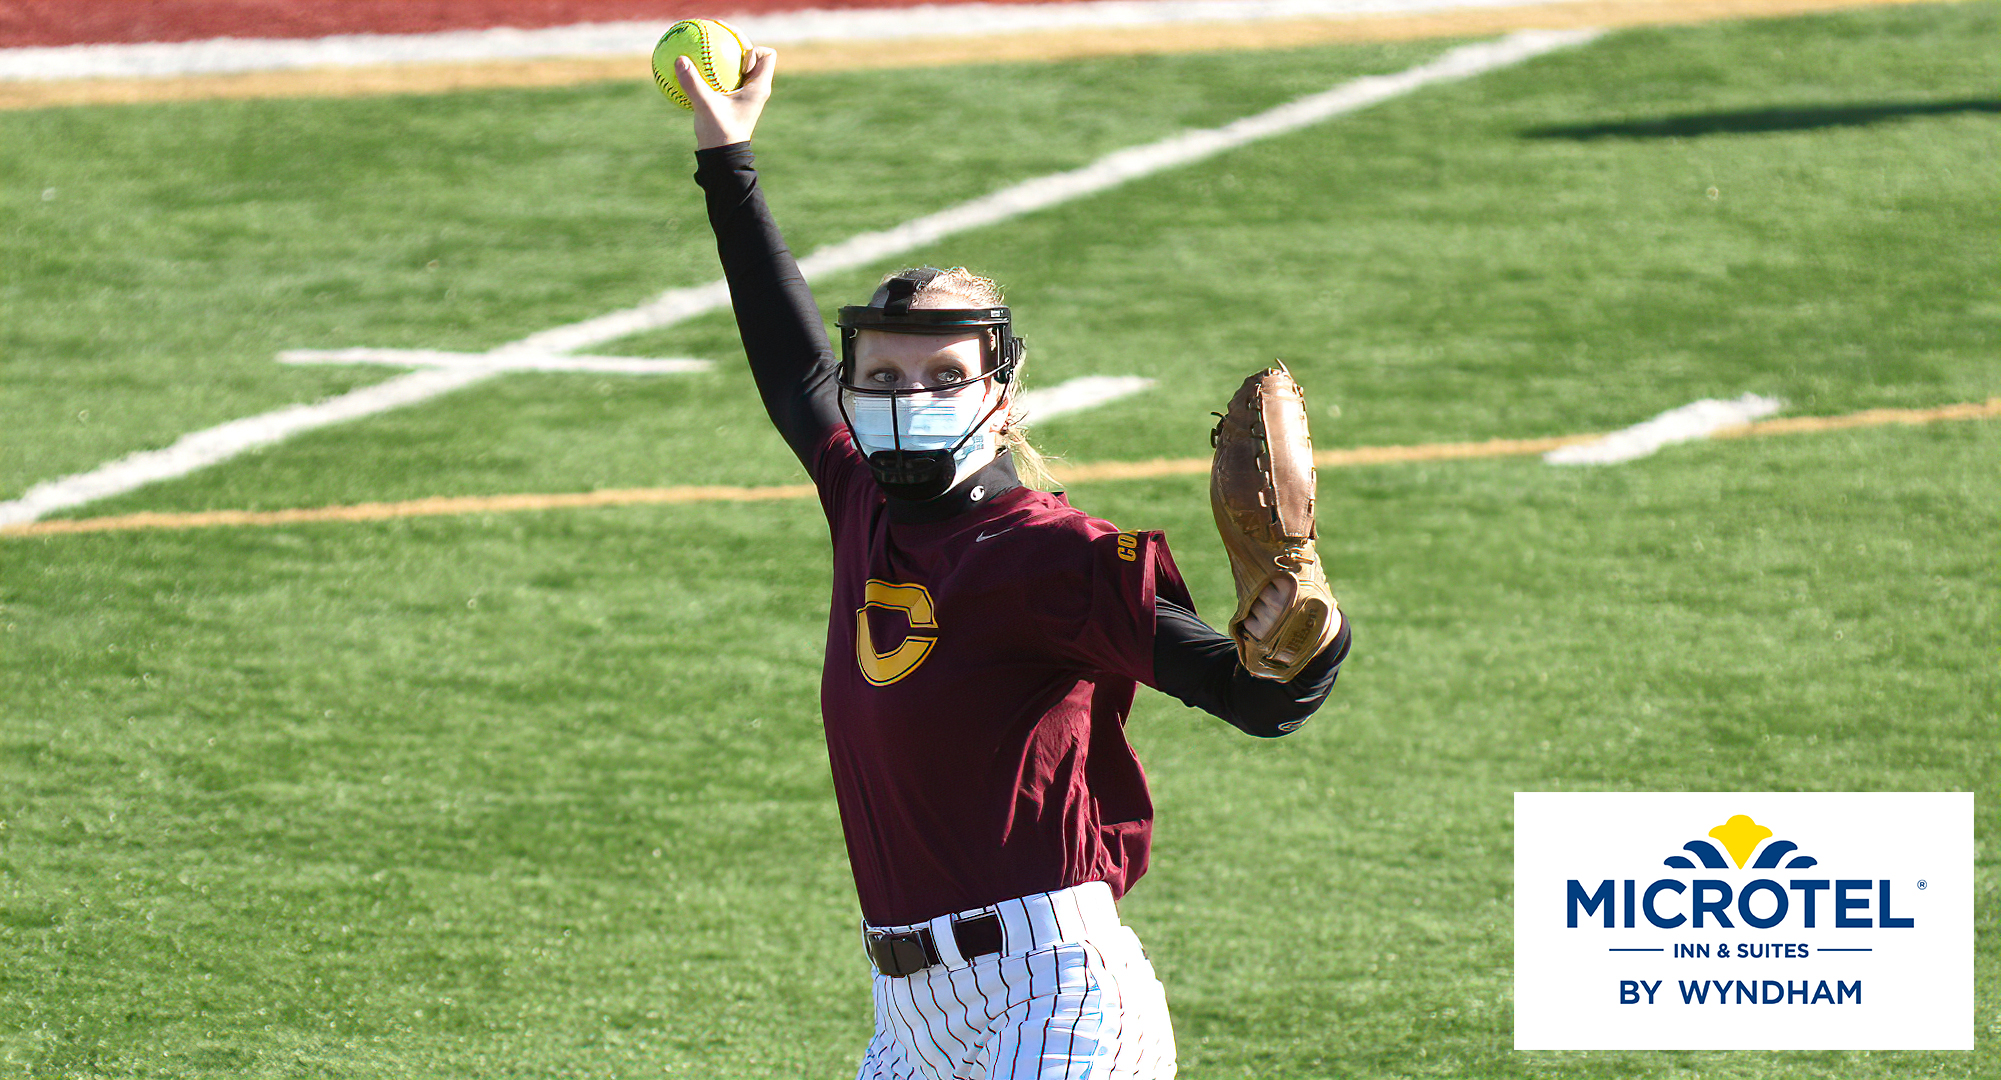 Sophomore pitcher Amber Taylor earned her MIAC-leading fourth win of the year as she helped the Cobbers beat Bethany Lutheran in Game 2 on Day 1 of the Viking Classic.